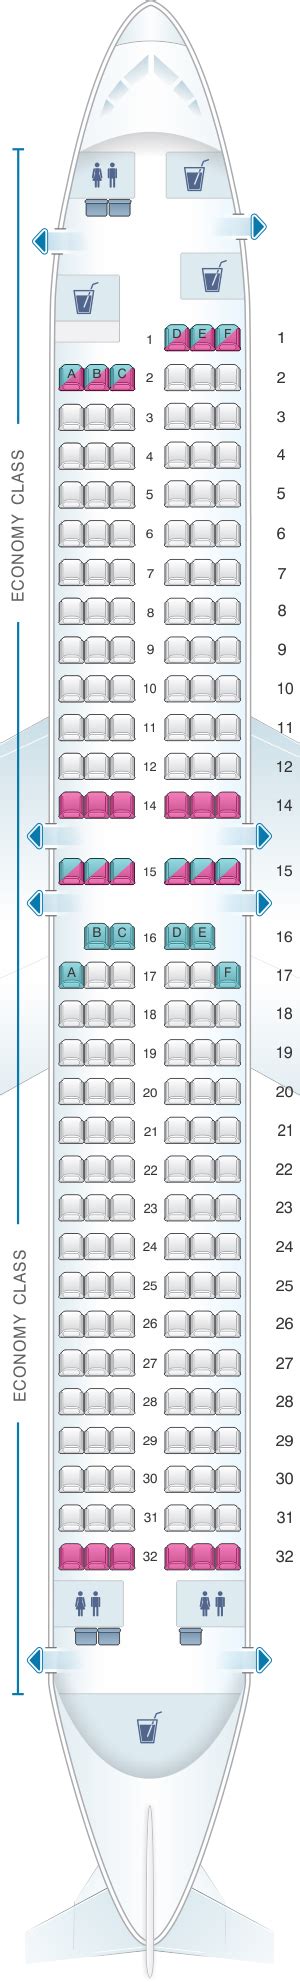 Boeing 737 800 Seating Chart Seat Map And Seating Chart Boeing 737